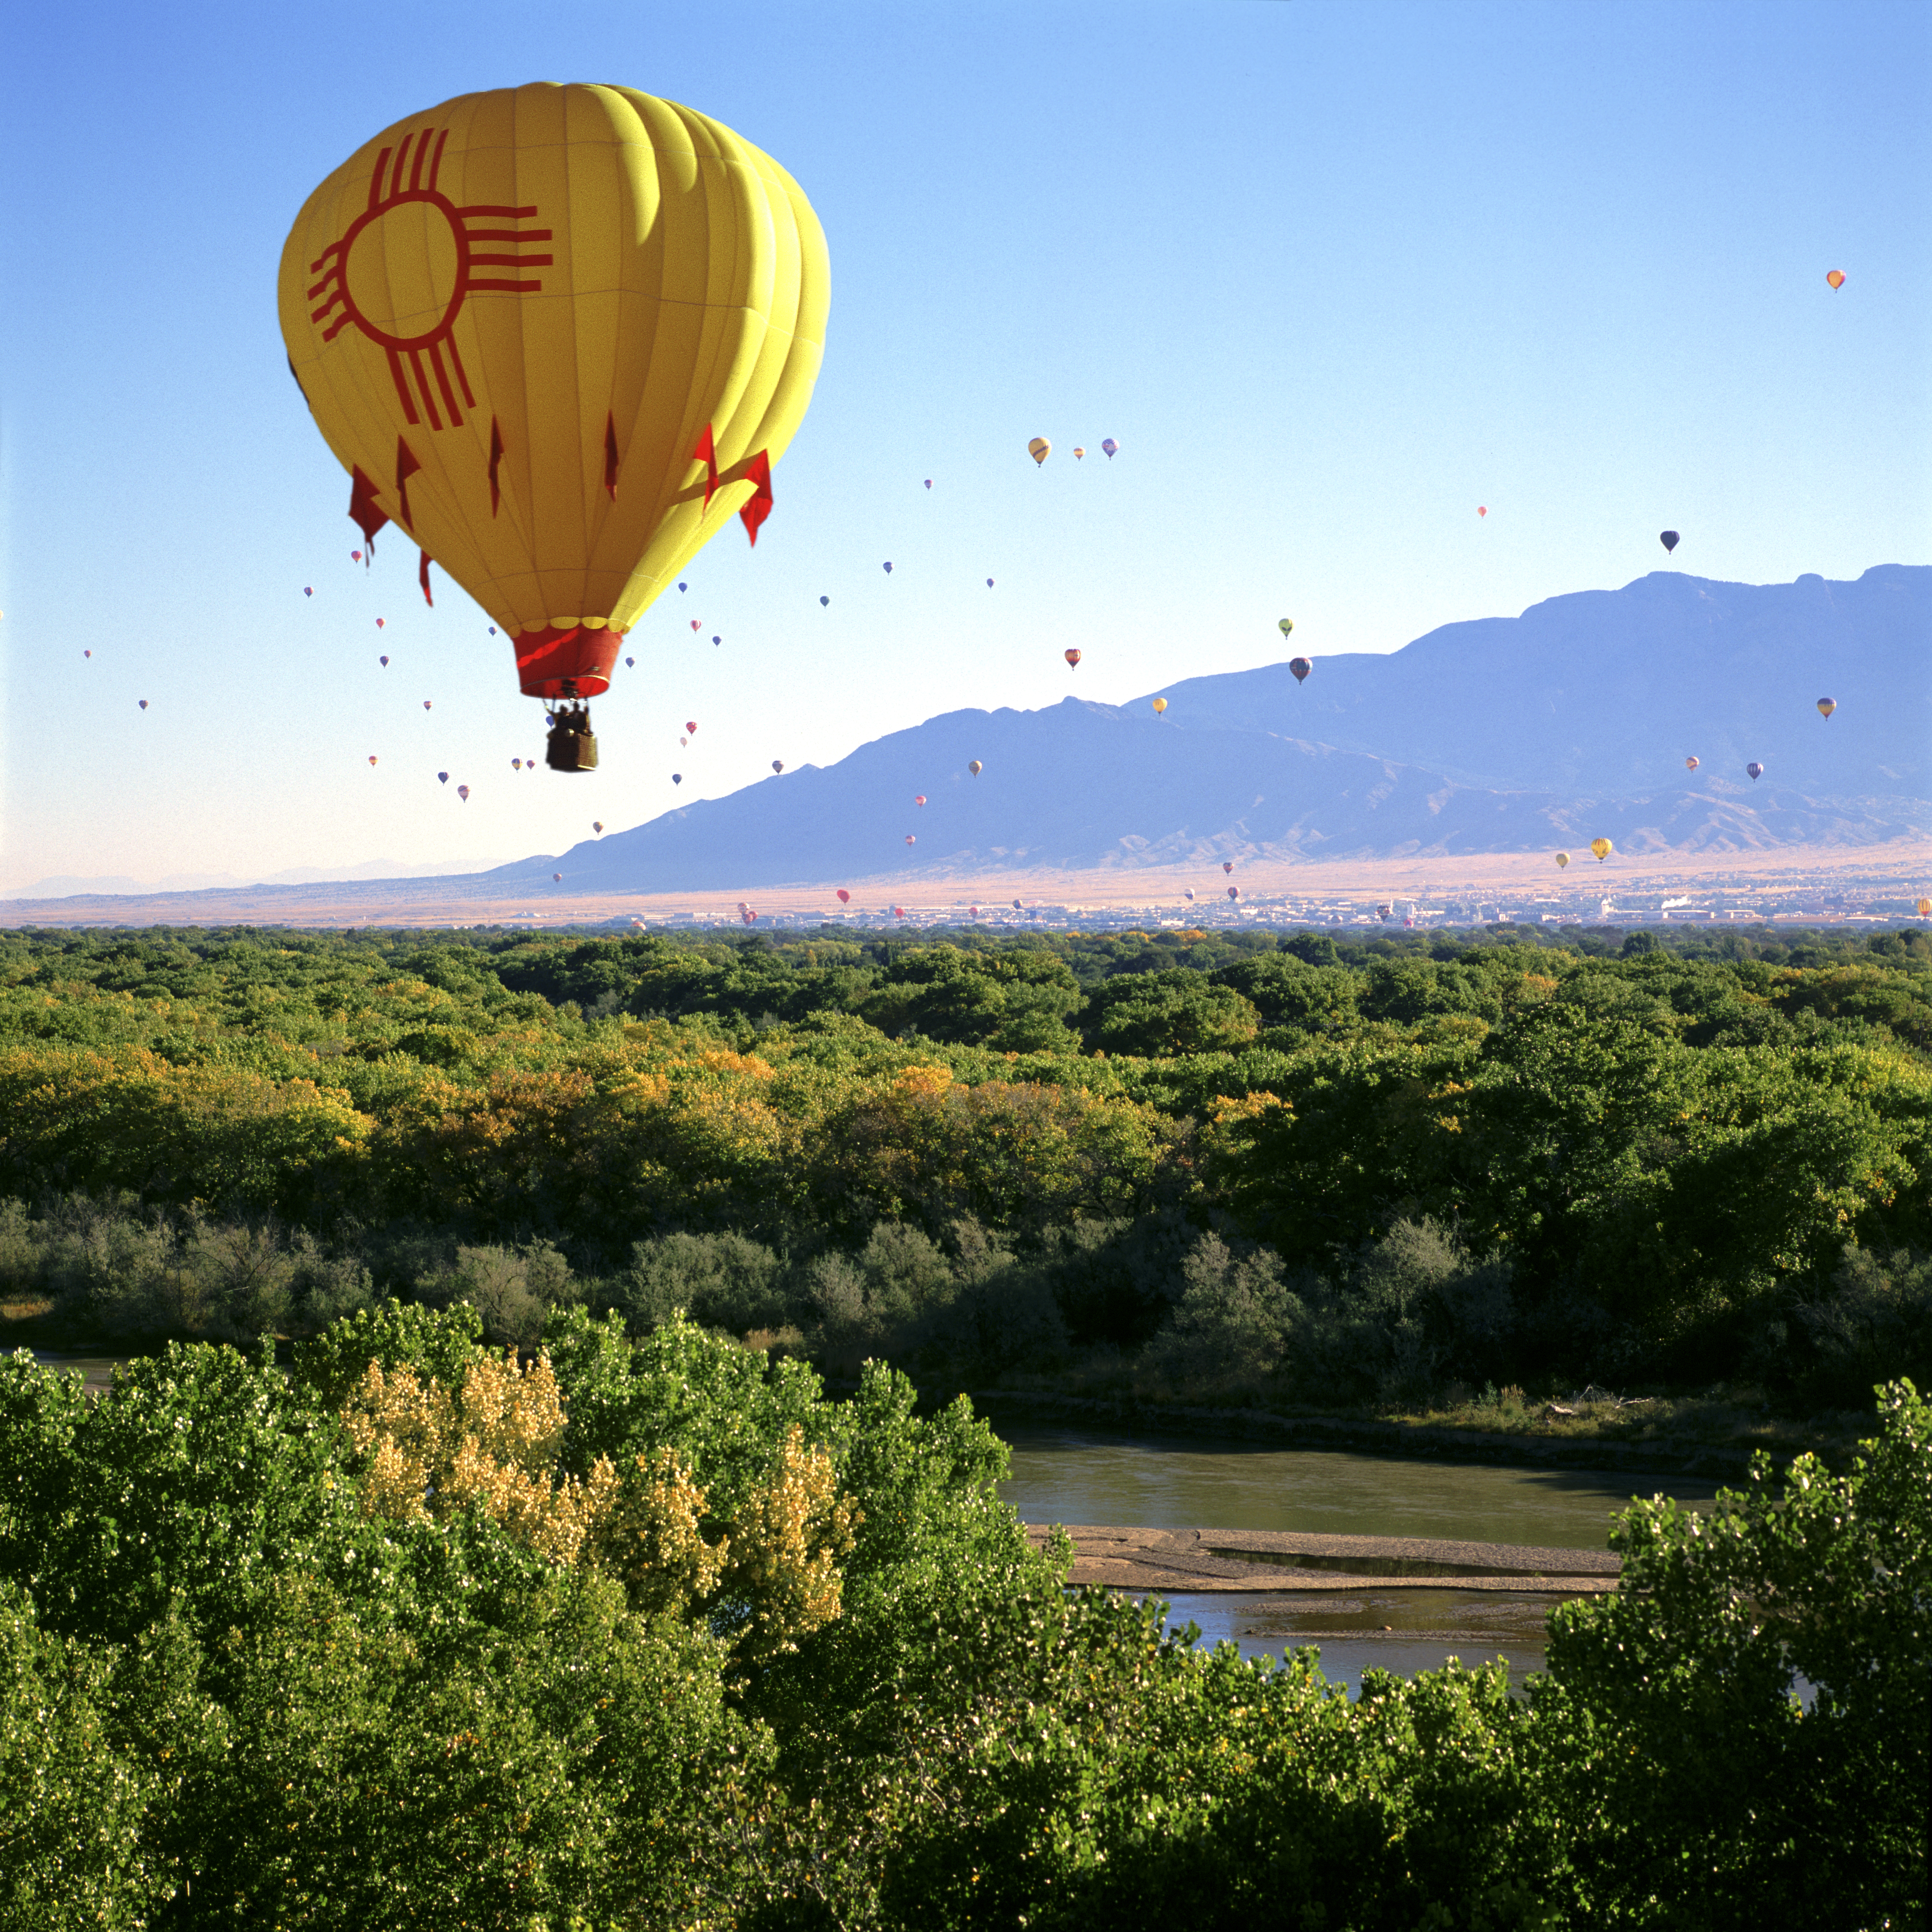 North Valley balloons 